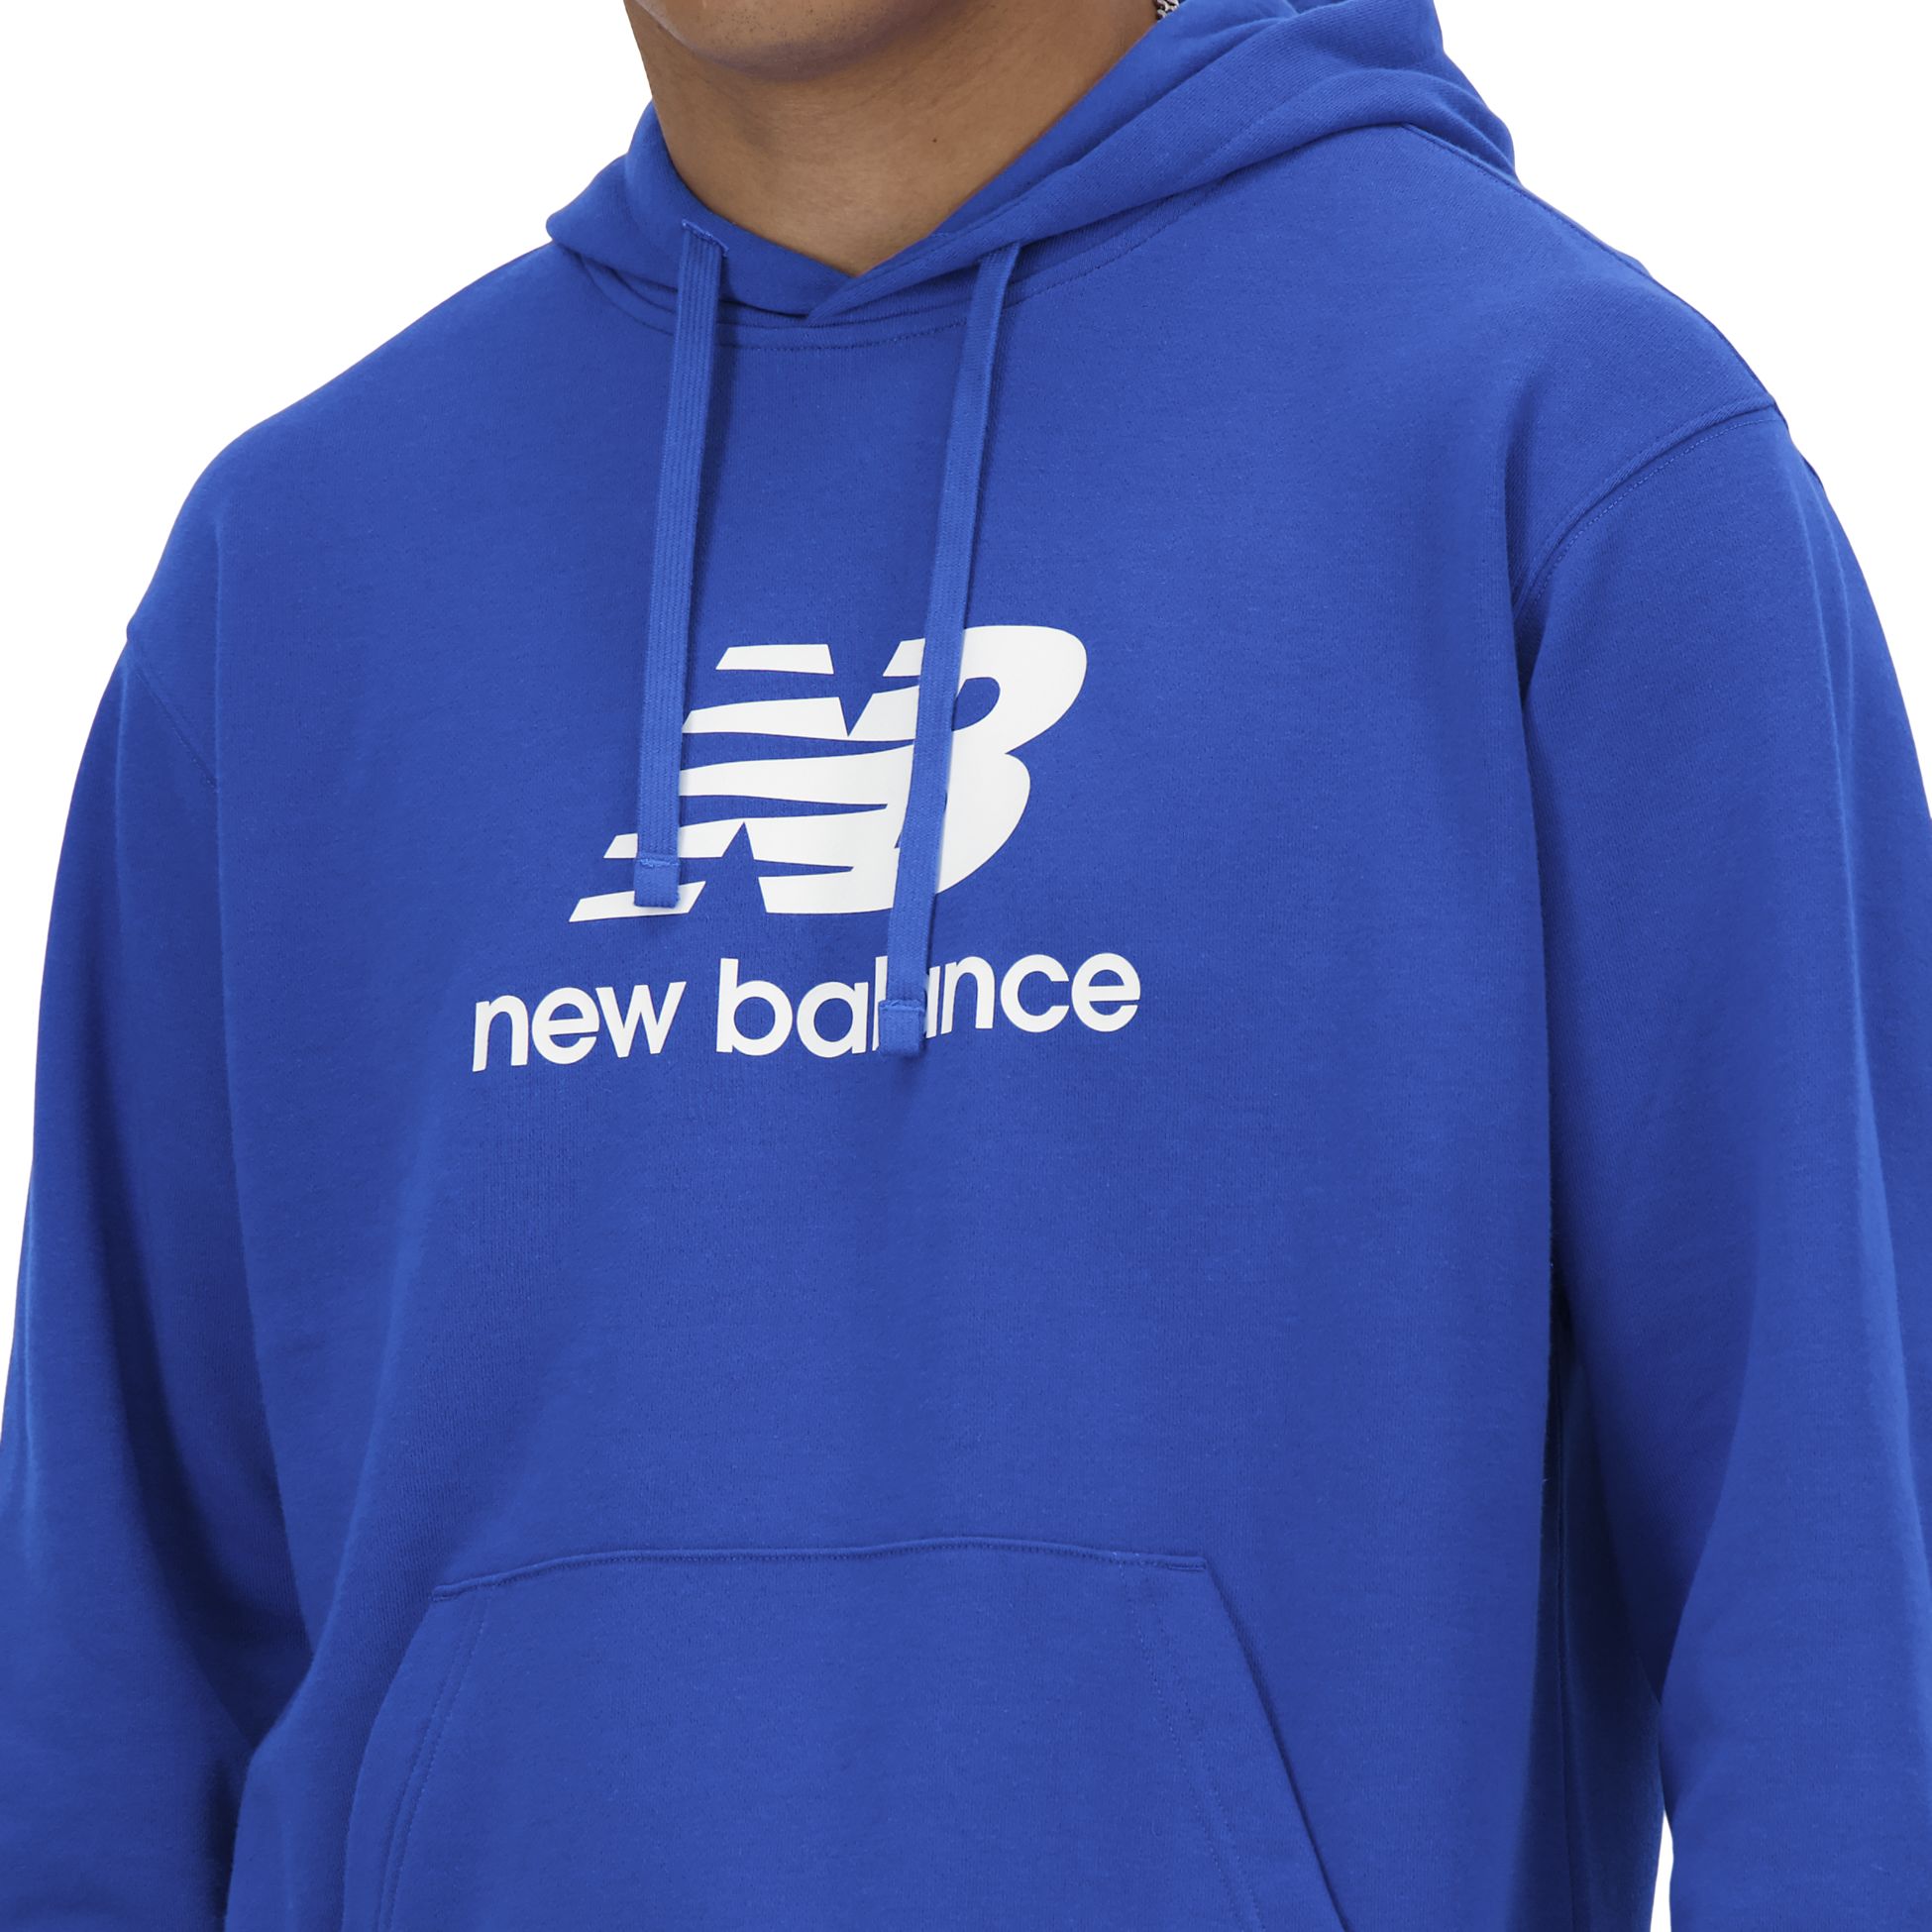 NEW BALANCE, STACKED LOGO FRENCH TERRY HOODIE